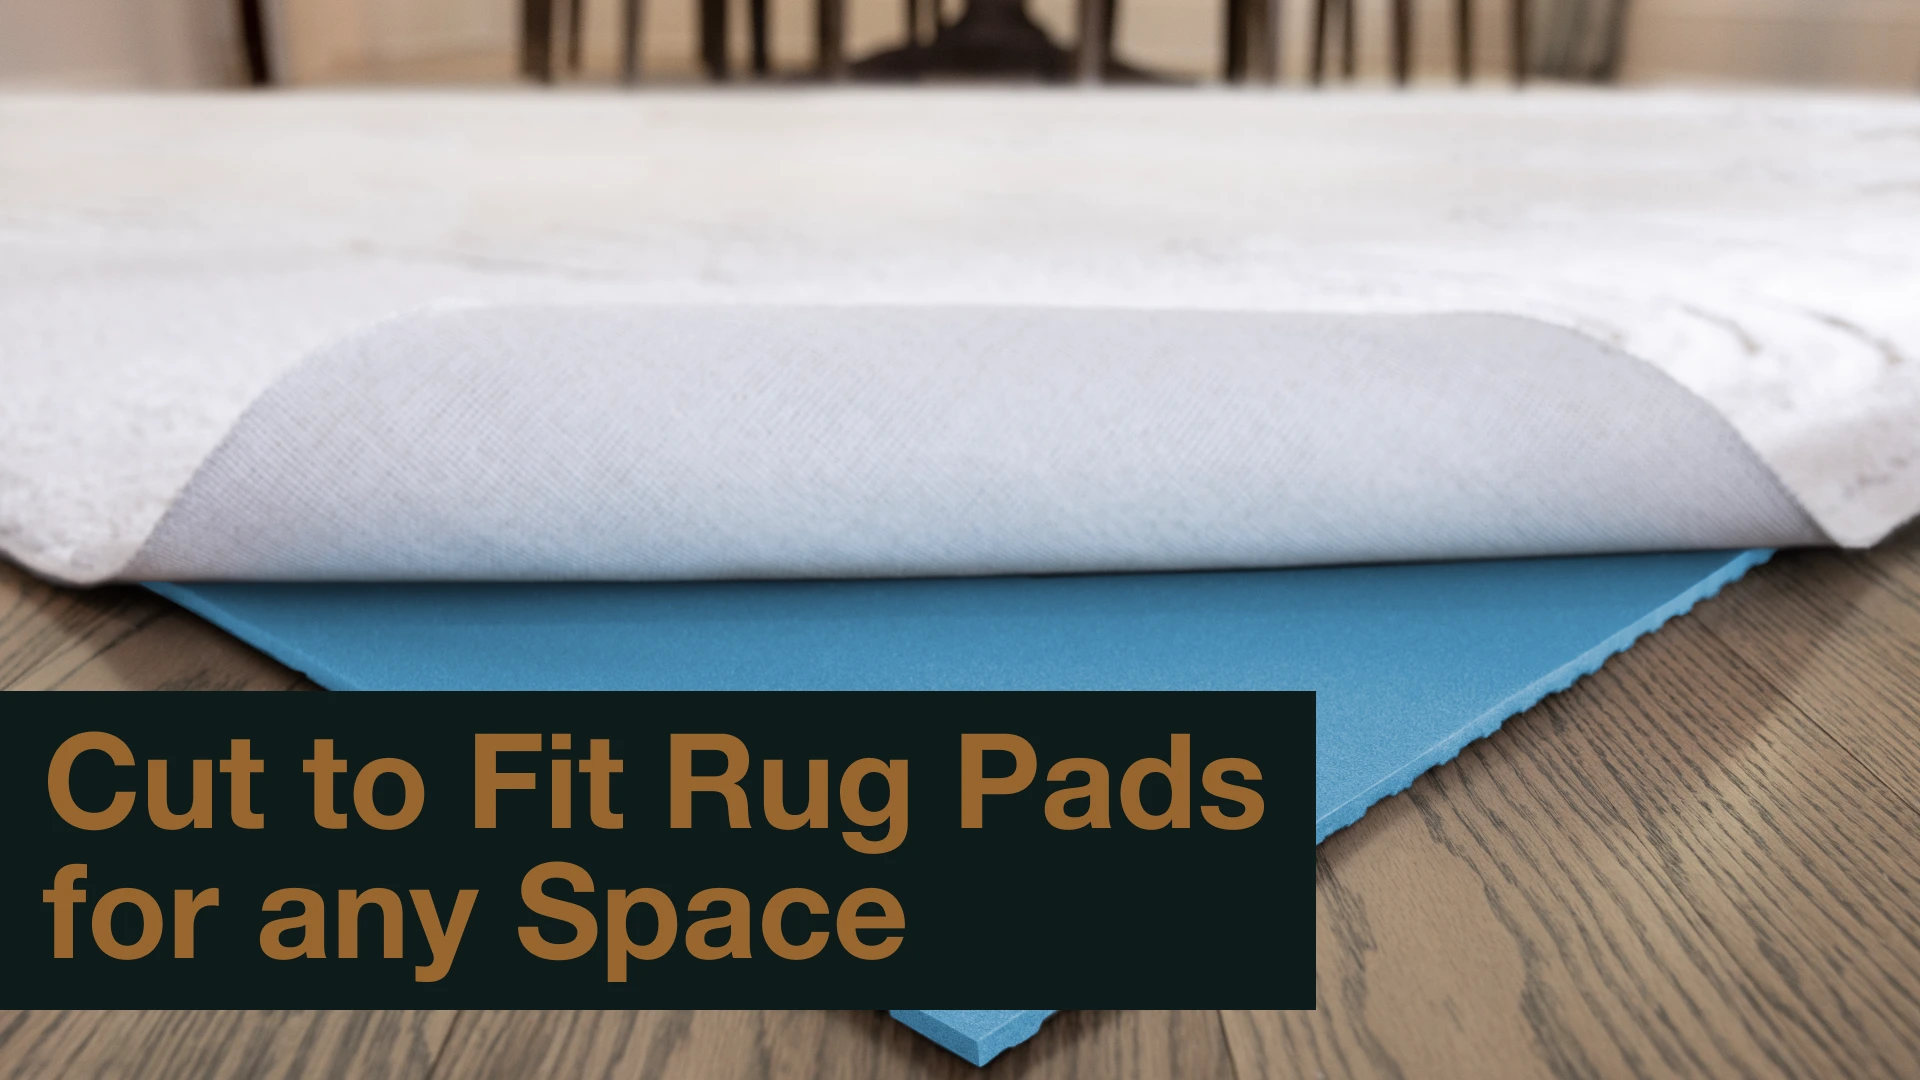 Cut to Fit Rug Pads for any Space